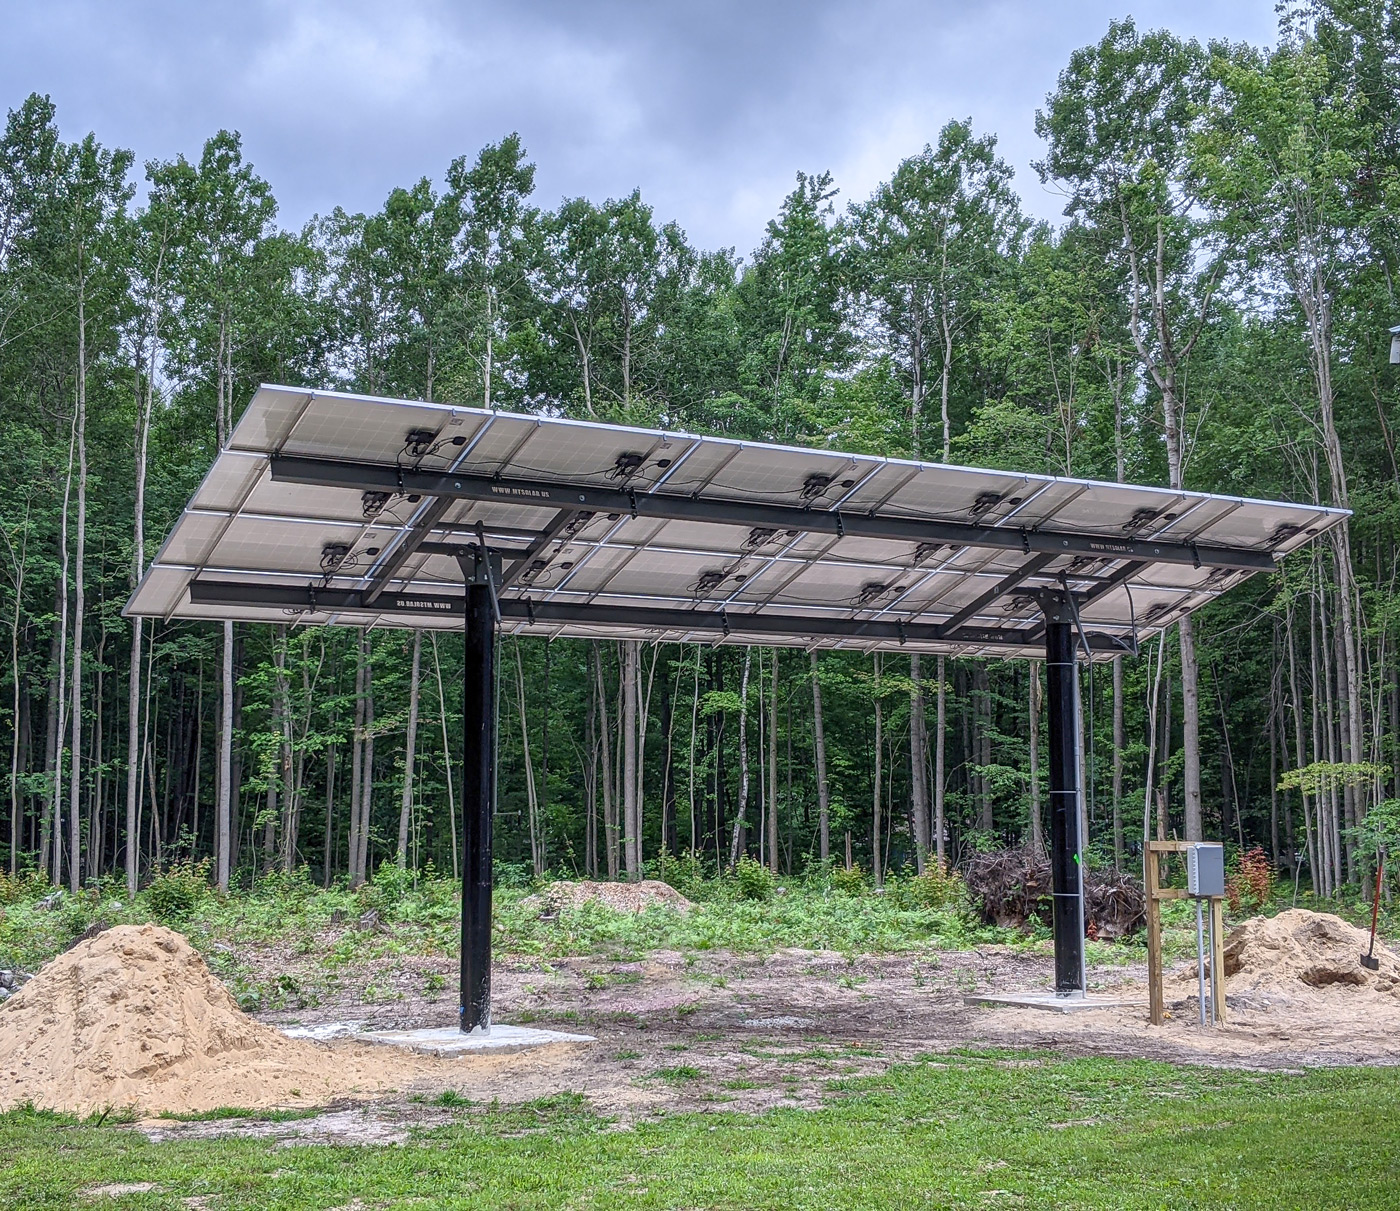 solar pole mount array with high ground clearance in forest setting